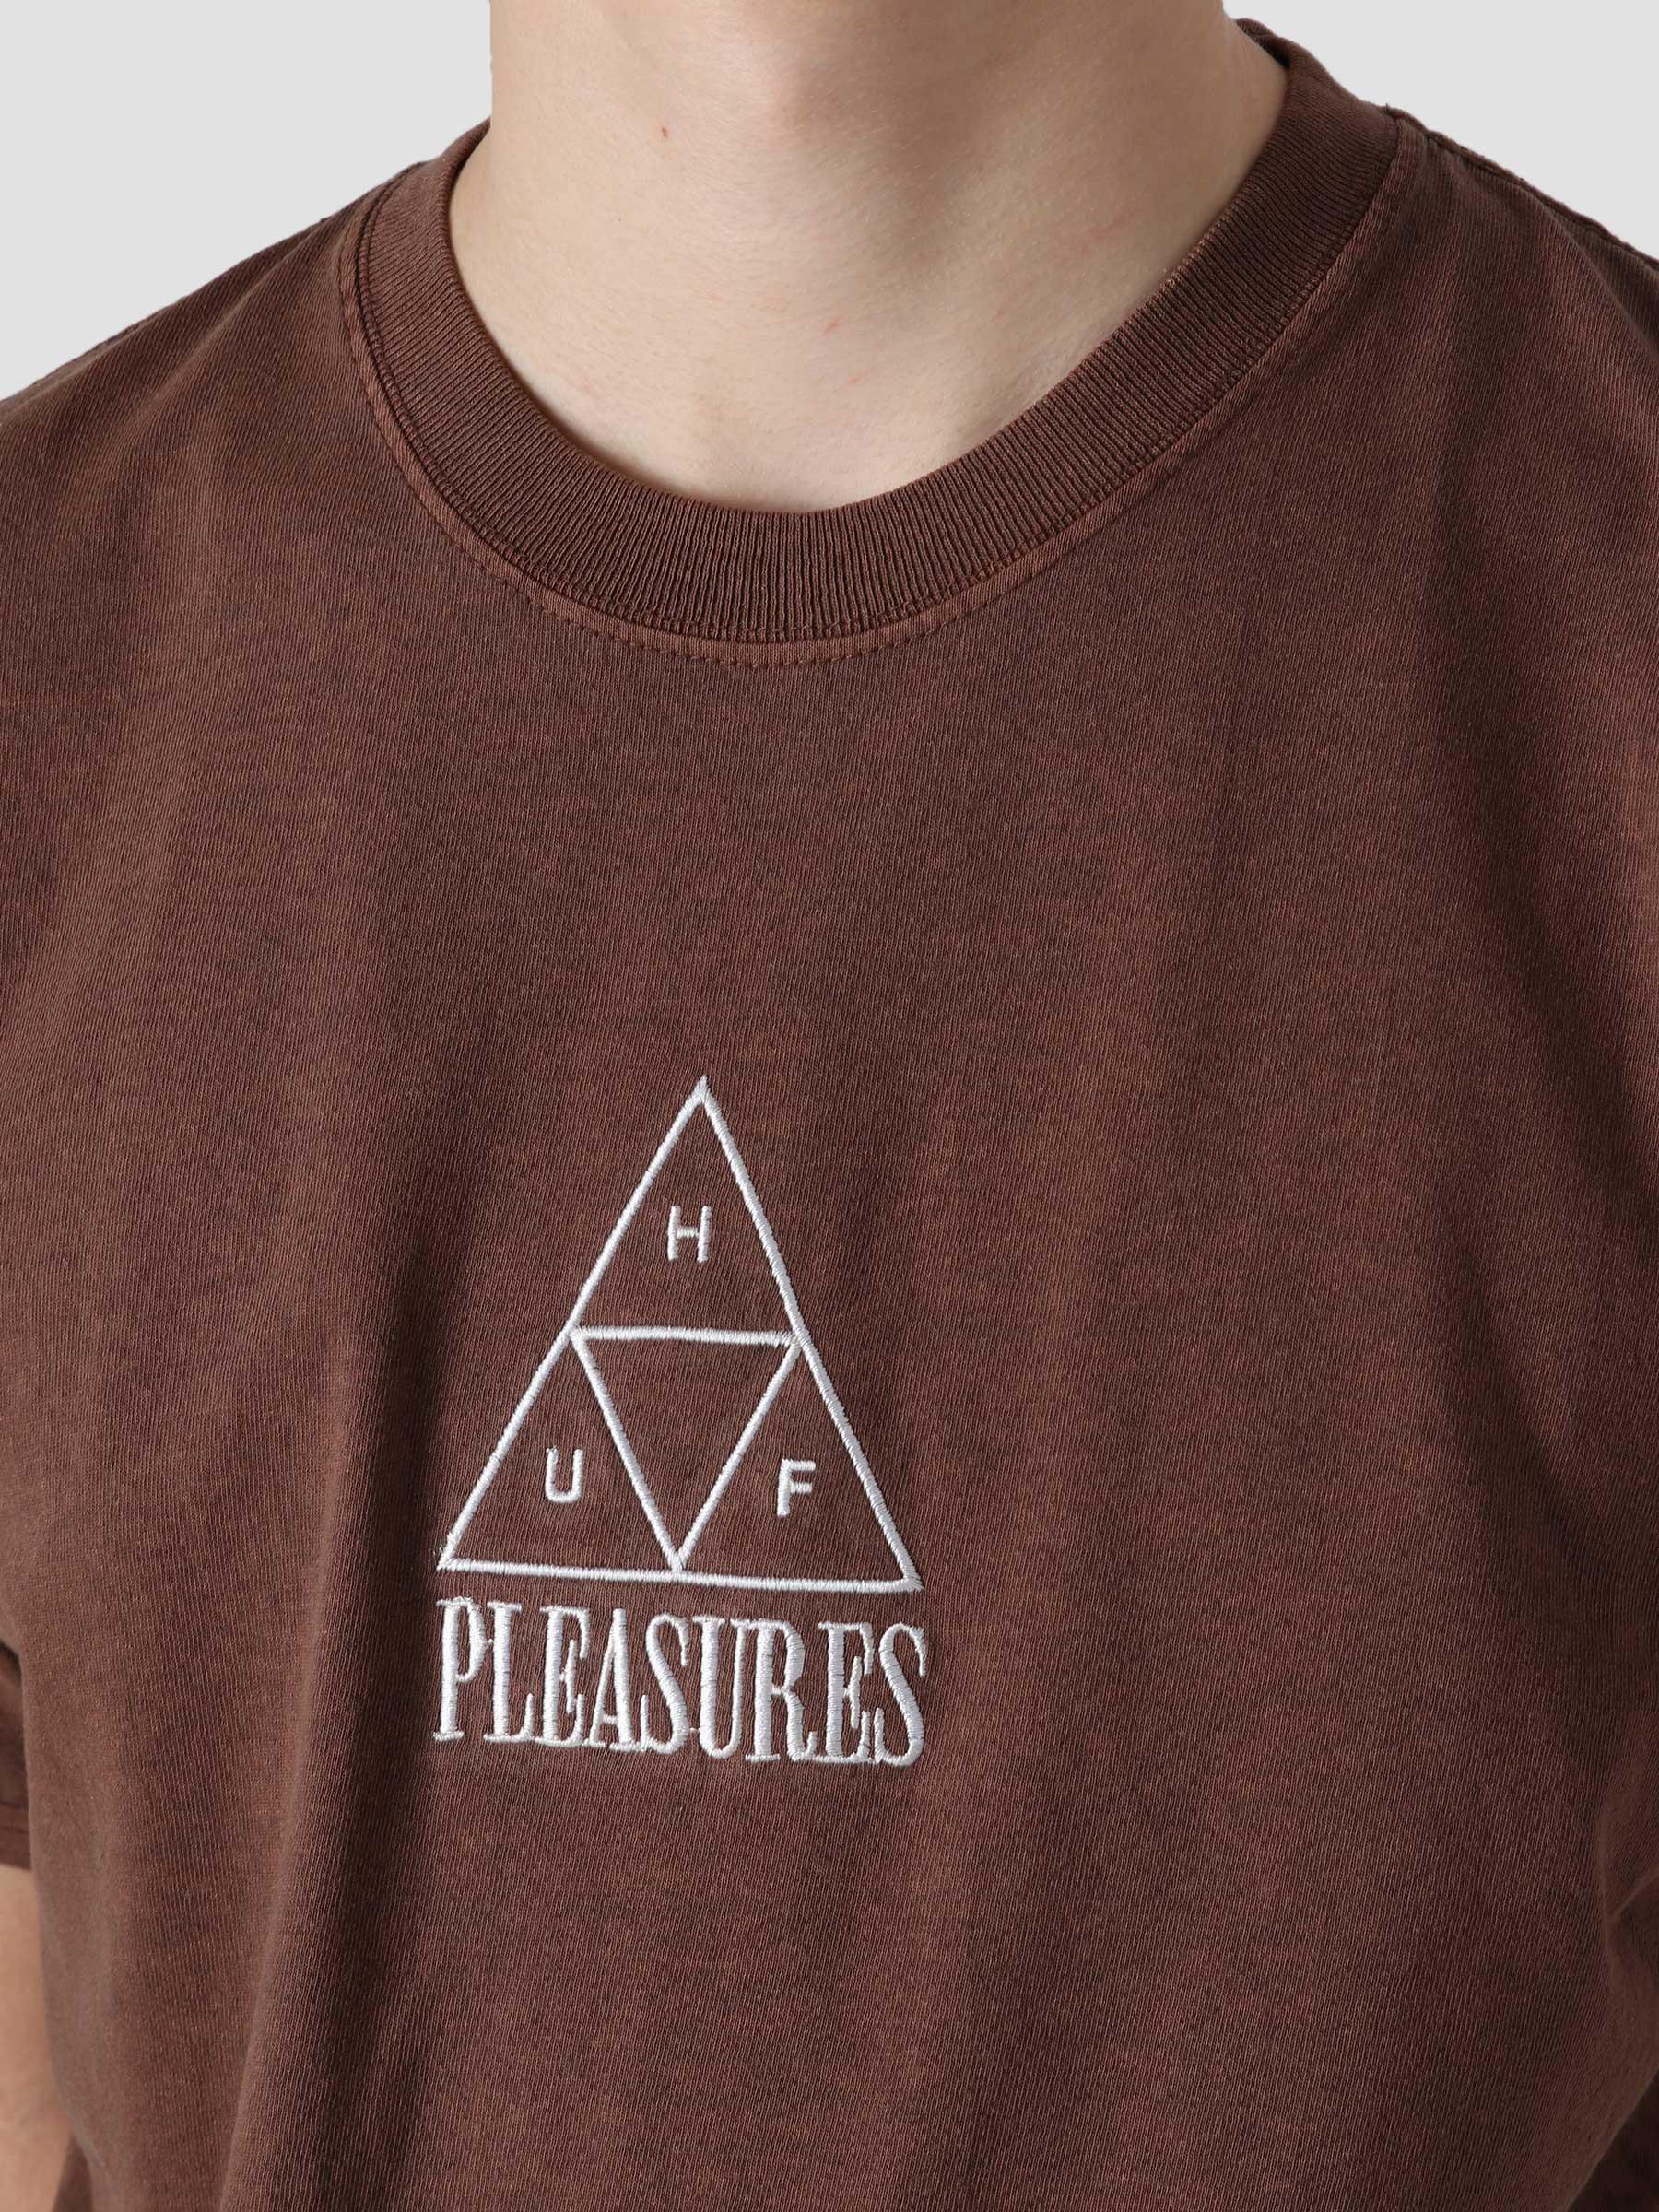 Huf X Pleasures Dyed S/S T-Shirt Brown TS01807